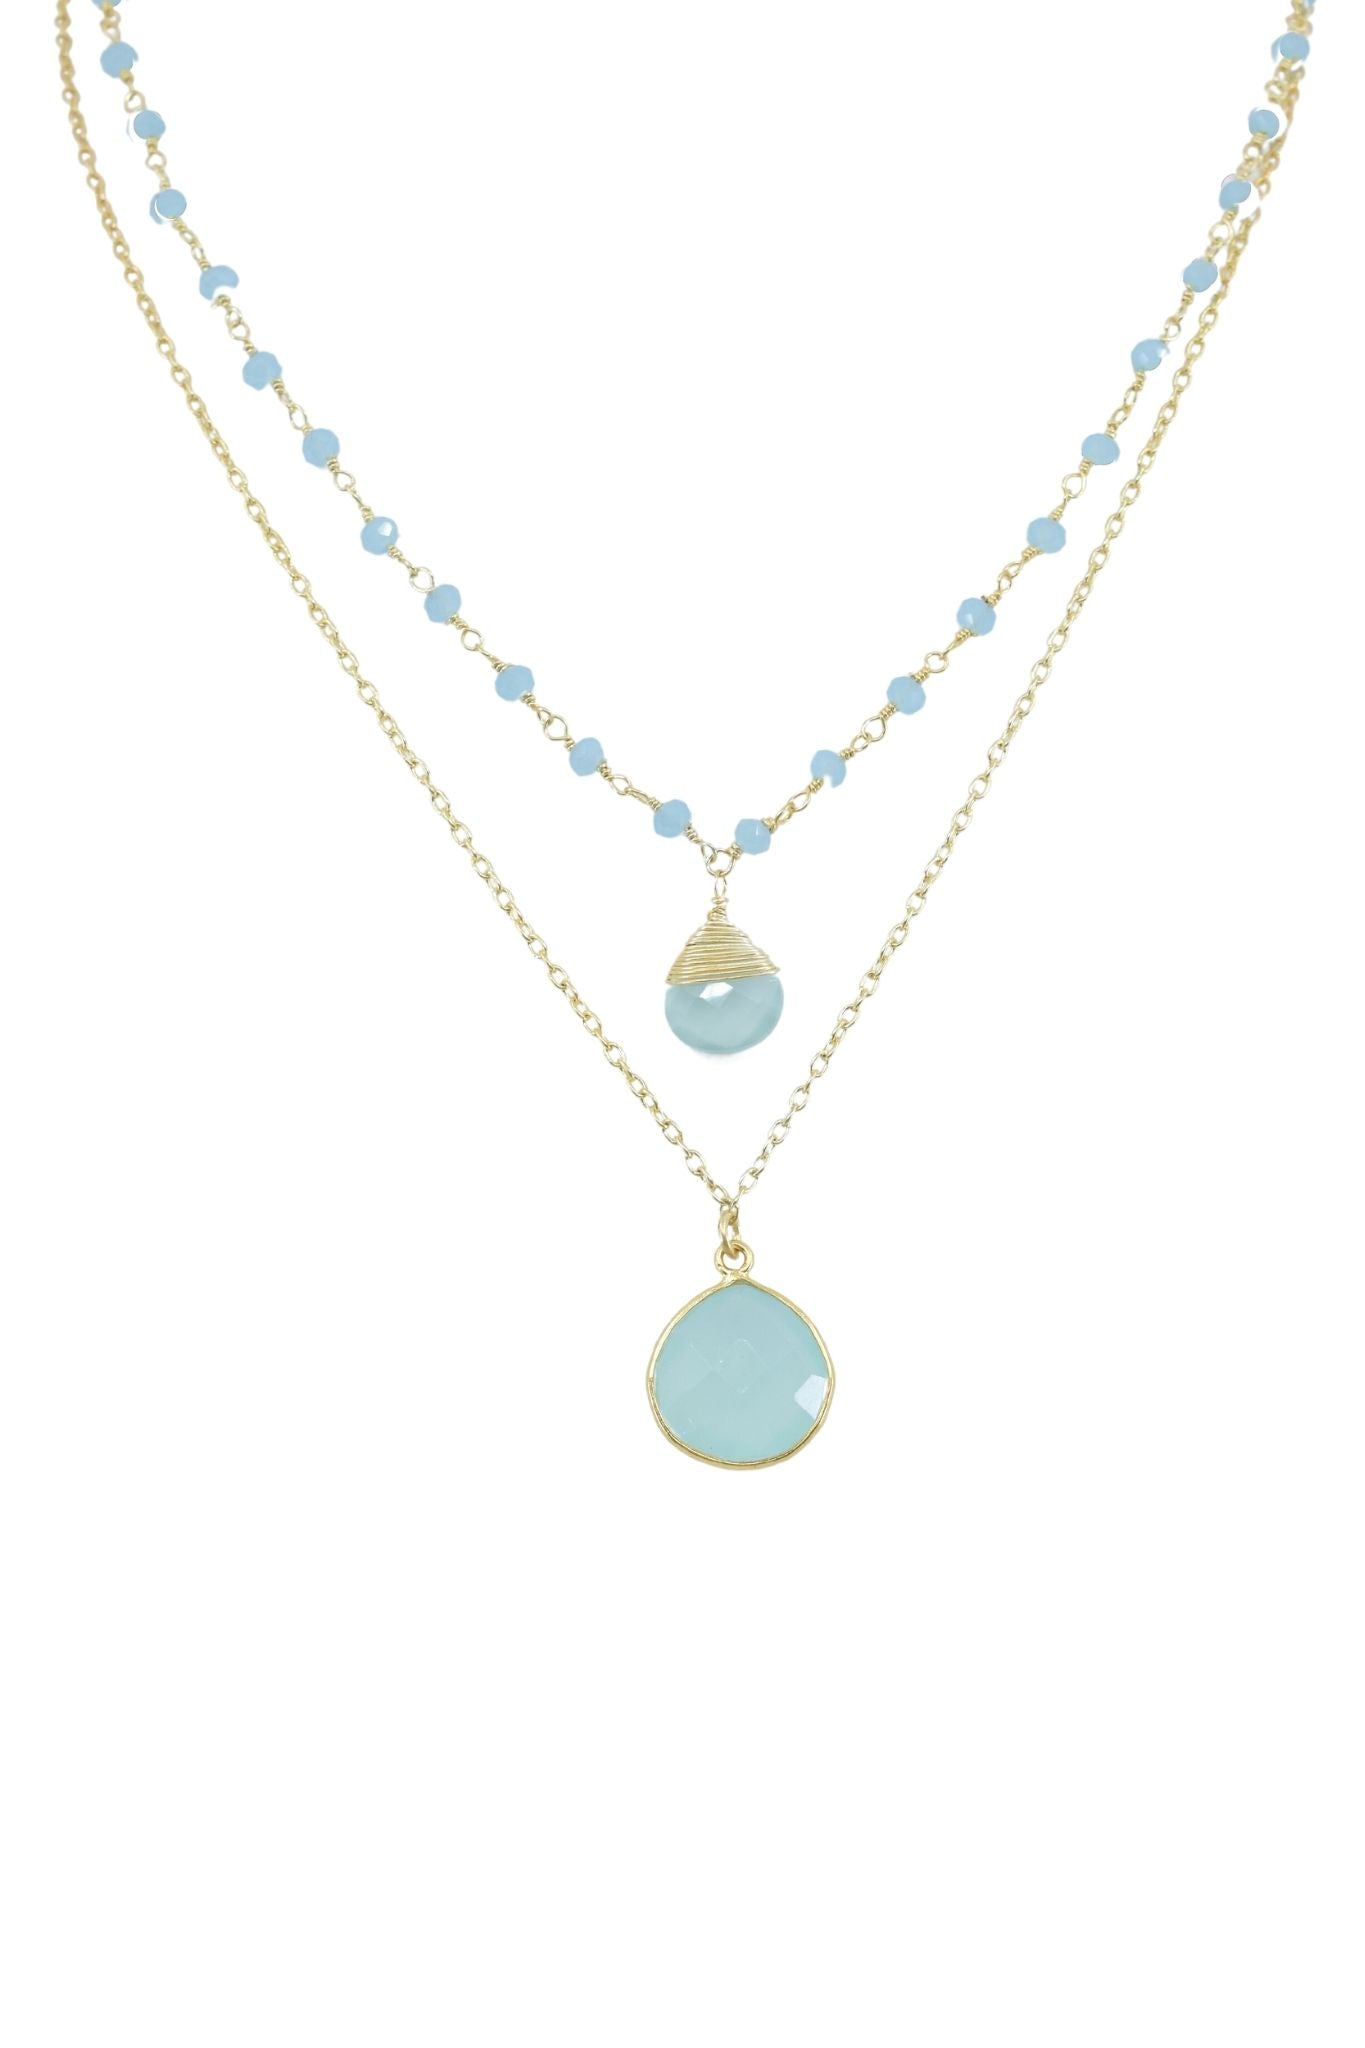 Double Jill Necklace with Gold Chalcedony Chain and Chalcedony Pendant